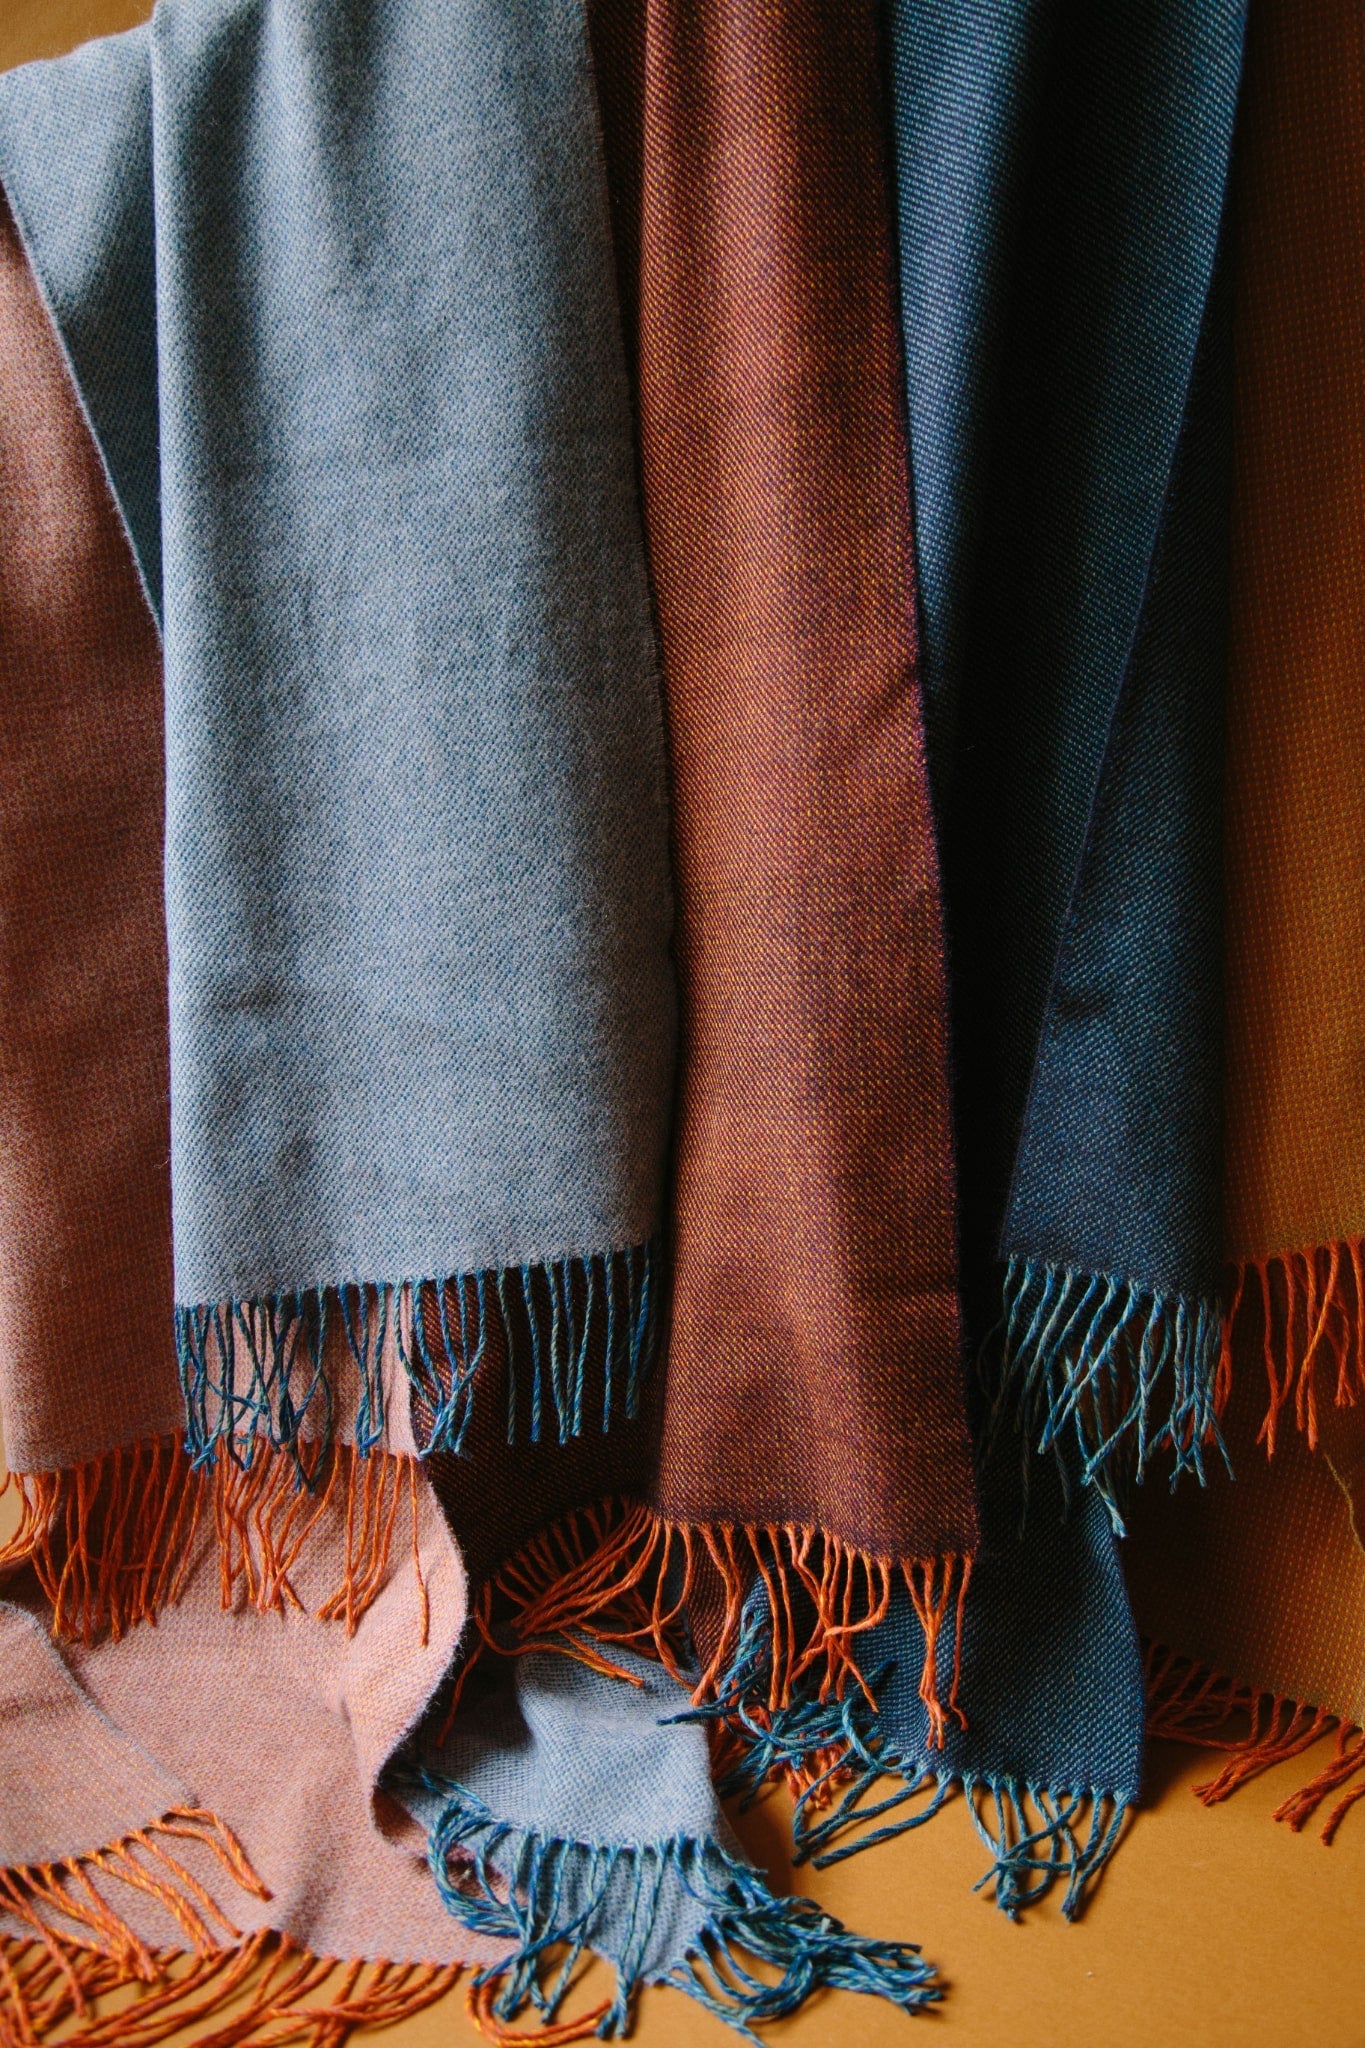 Close-up shot of five merino wool scarves, in shades of blue and red with tassels at each end. The scarves are hung from a black curtain pole against a brown background in natural light. 